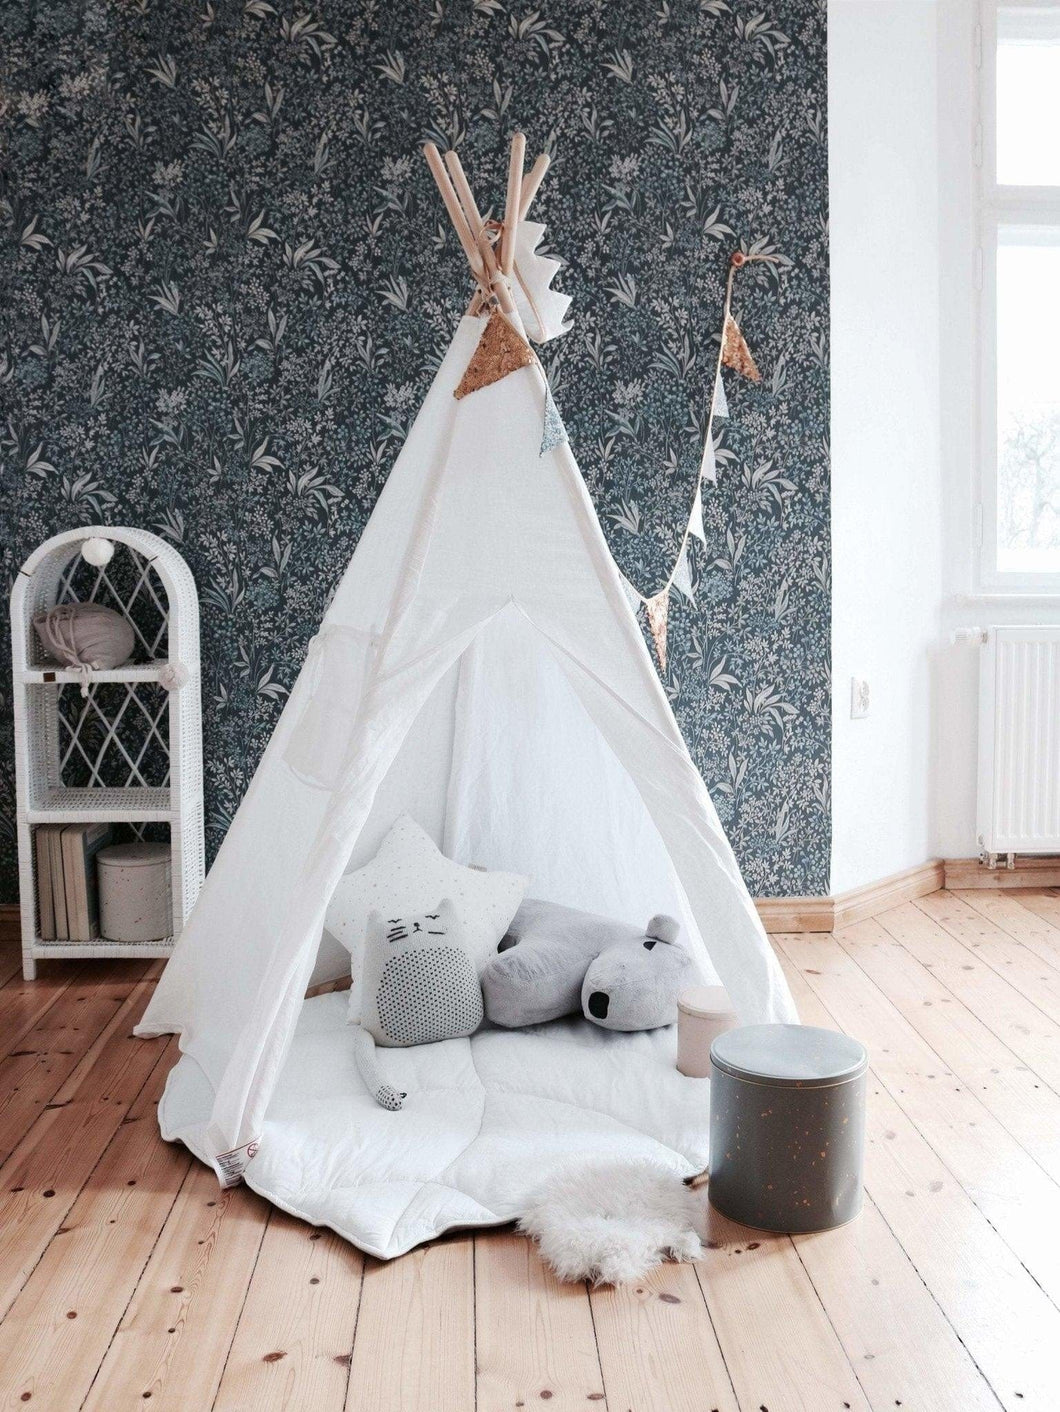 moimili.us Set teepee with mat “White” Linen Teepee Tent and 